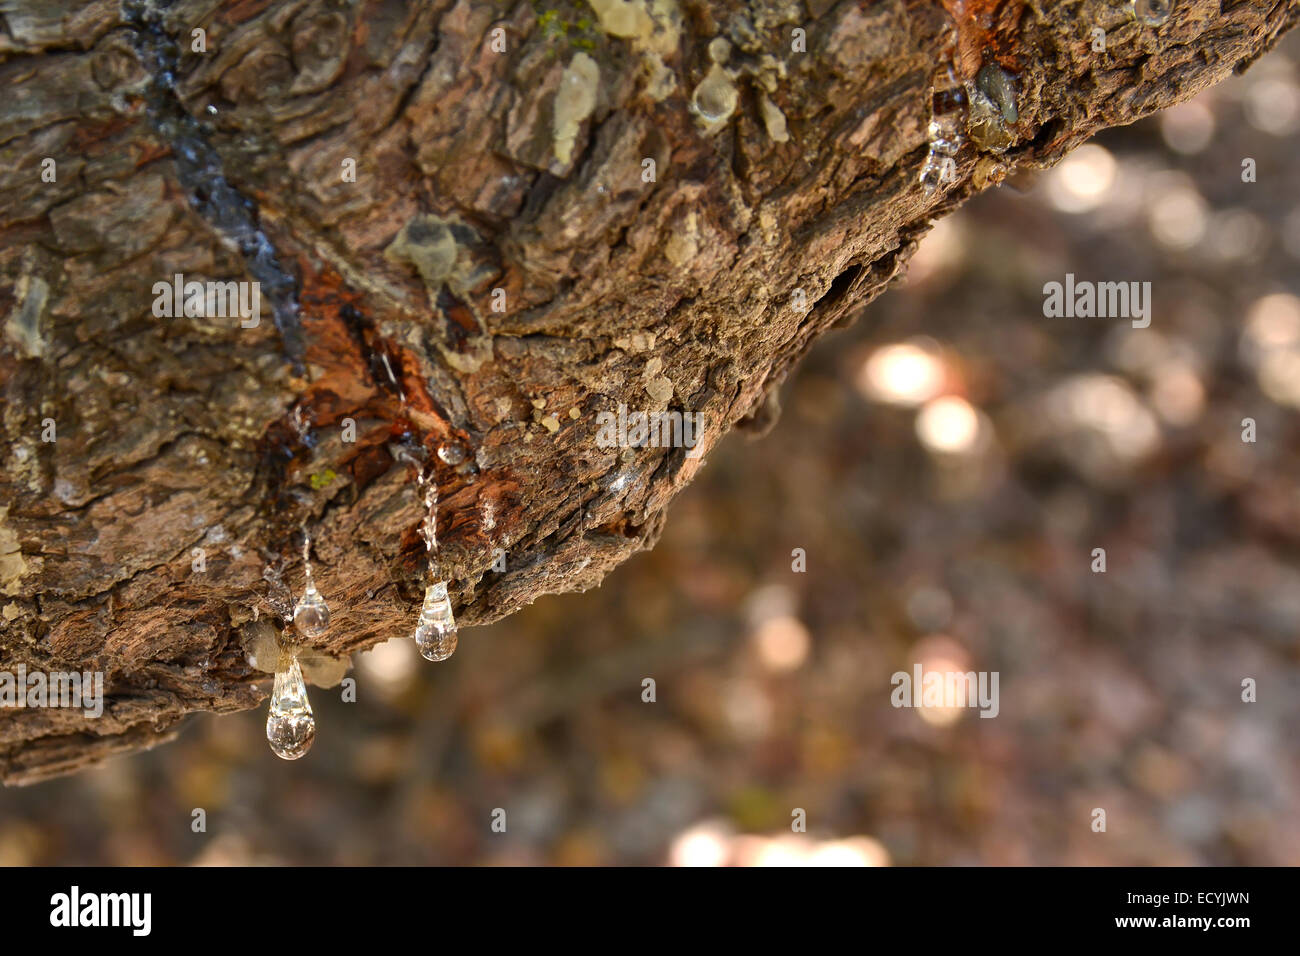 Silvery drops of mastic resin ooze from a mastic tree on the Greek island of Chios Stock Photo